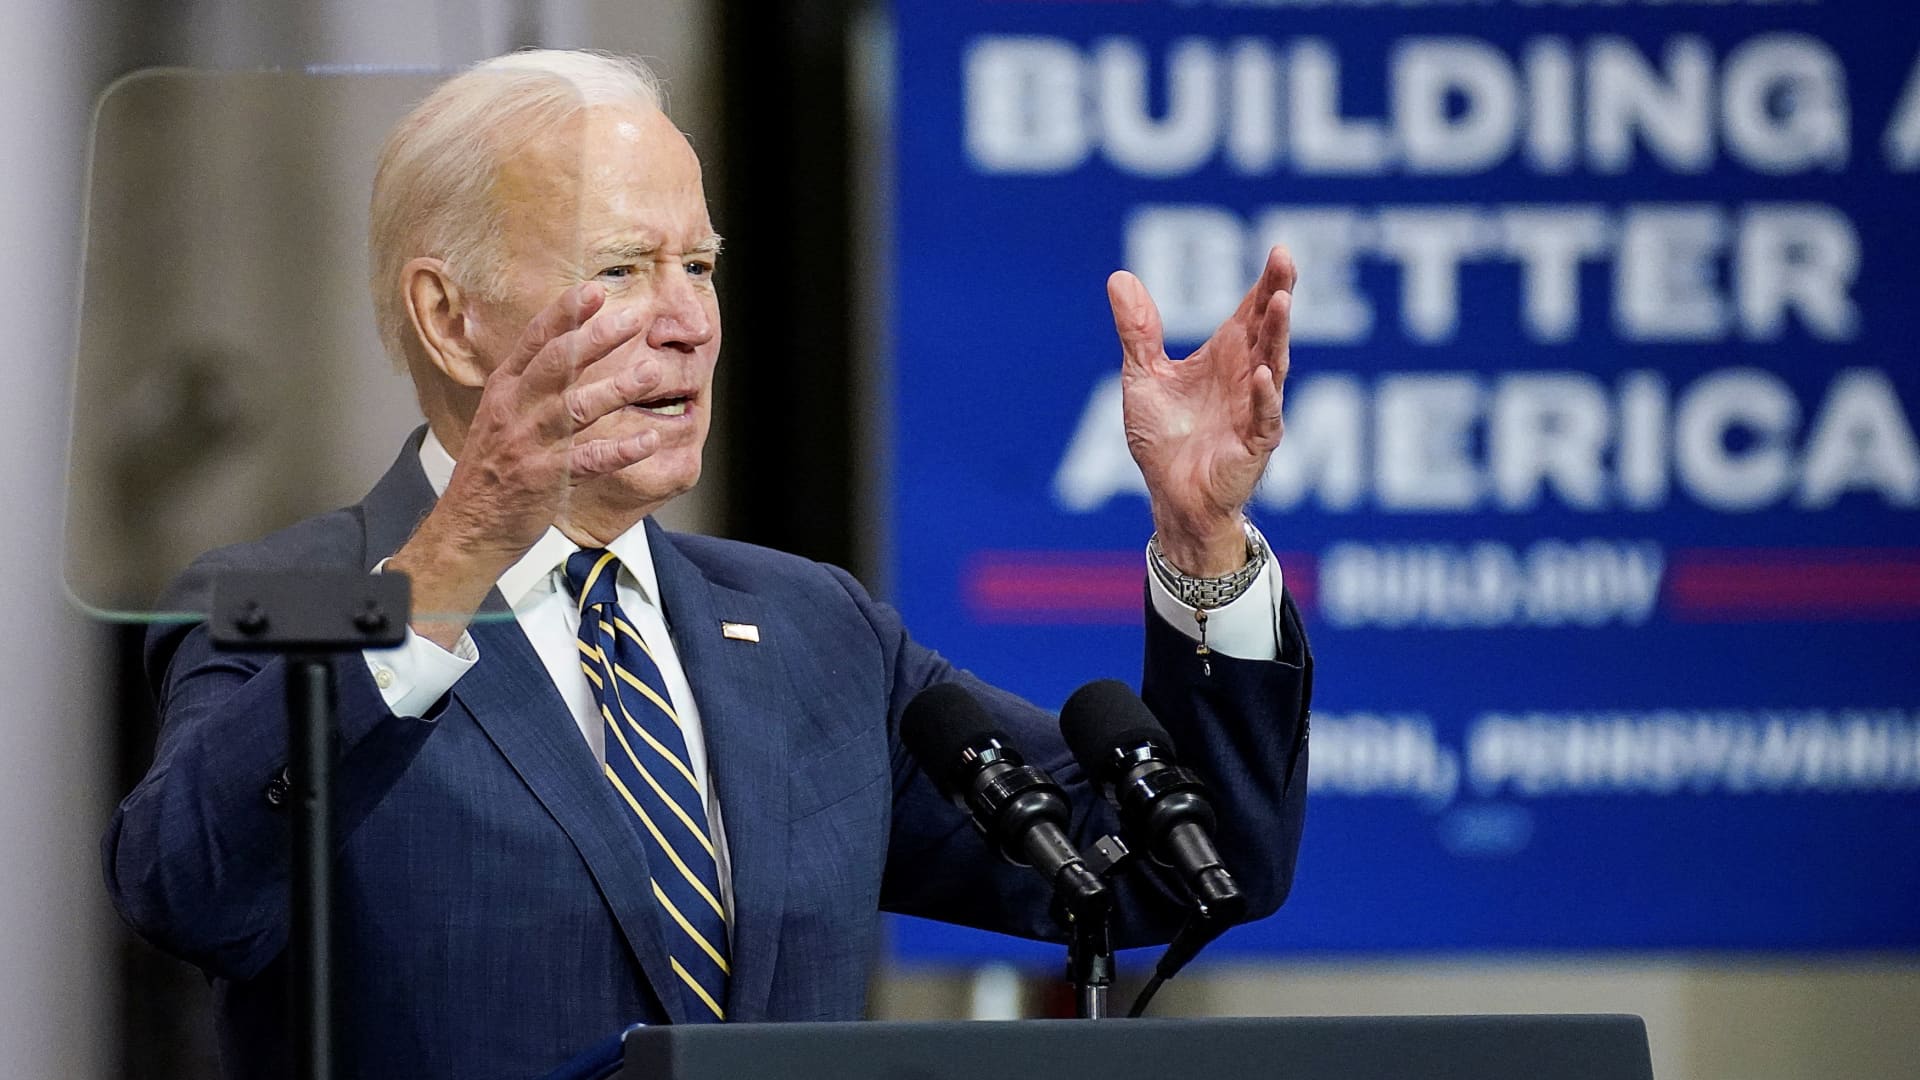 Biden announces $1.3 billion to build new power lines, upgrade aging electric grid - CNBC